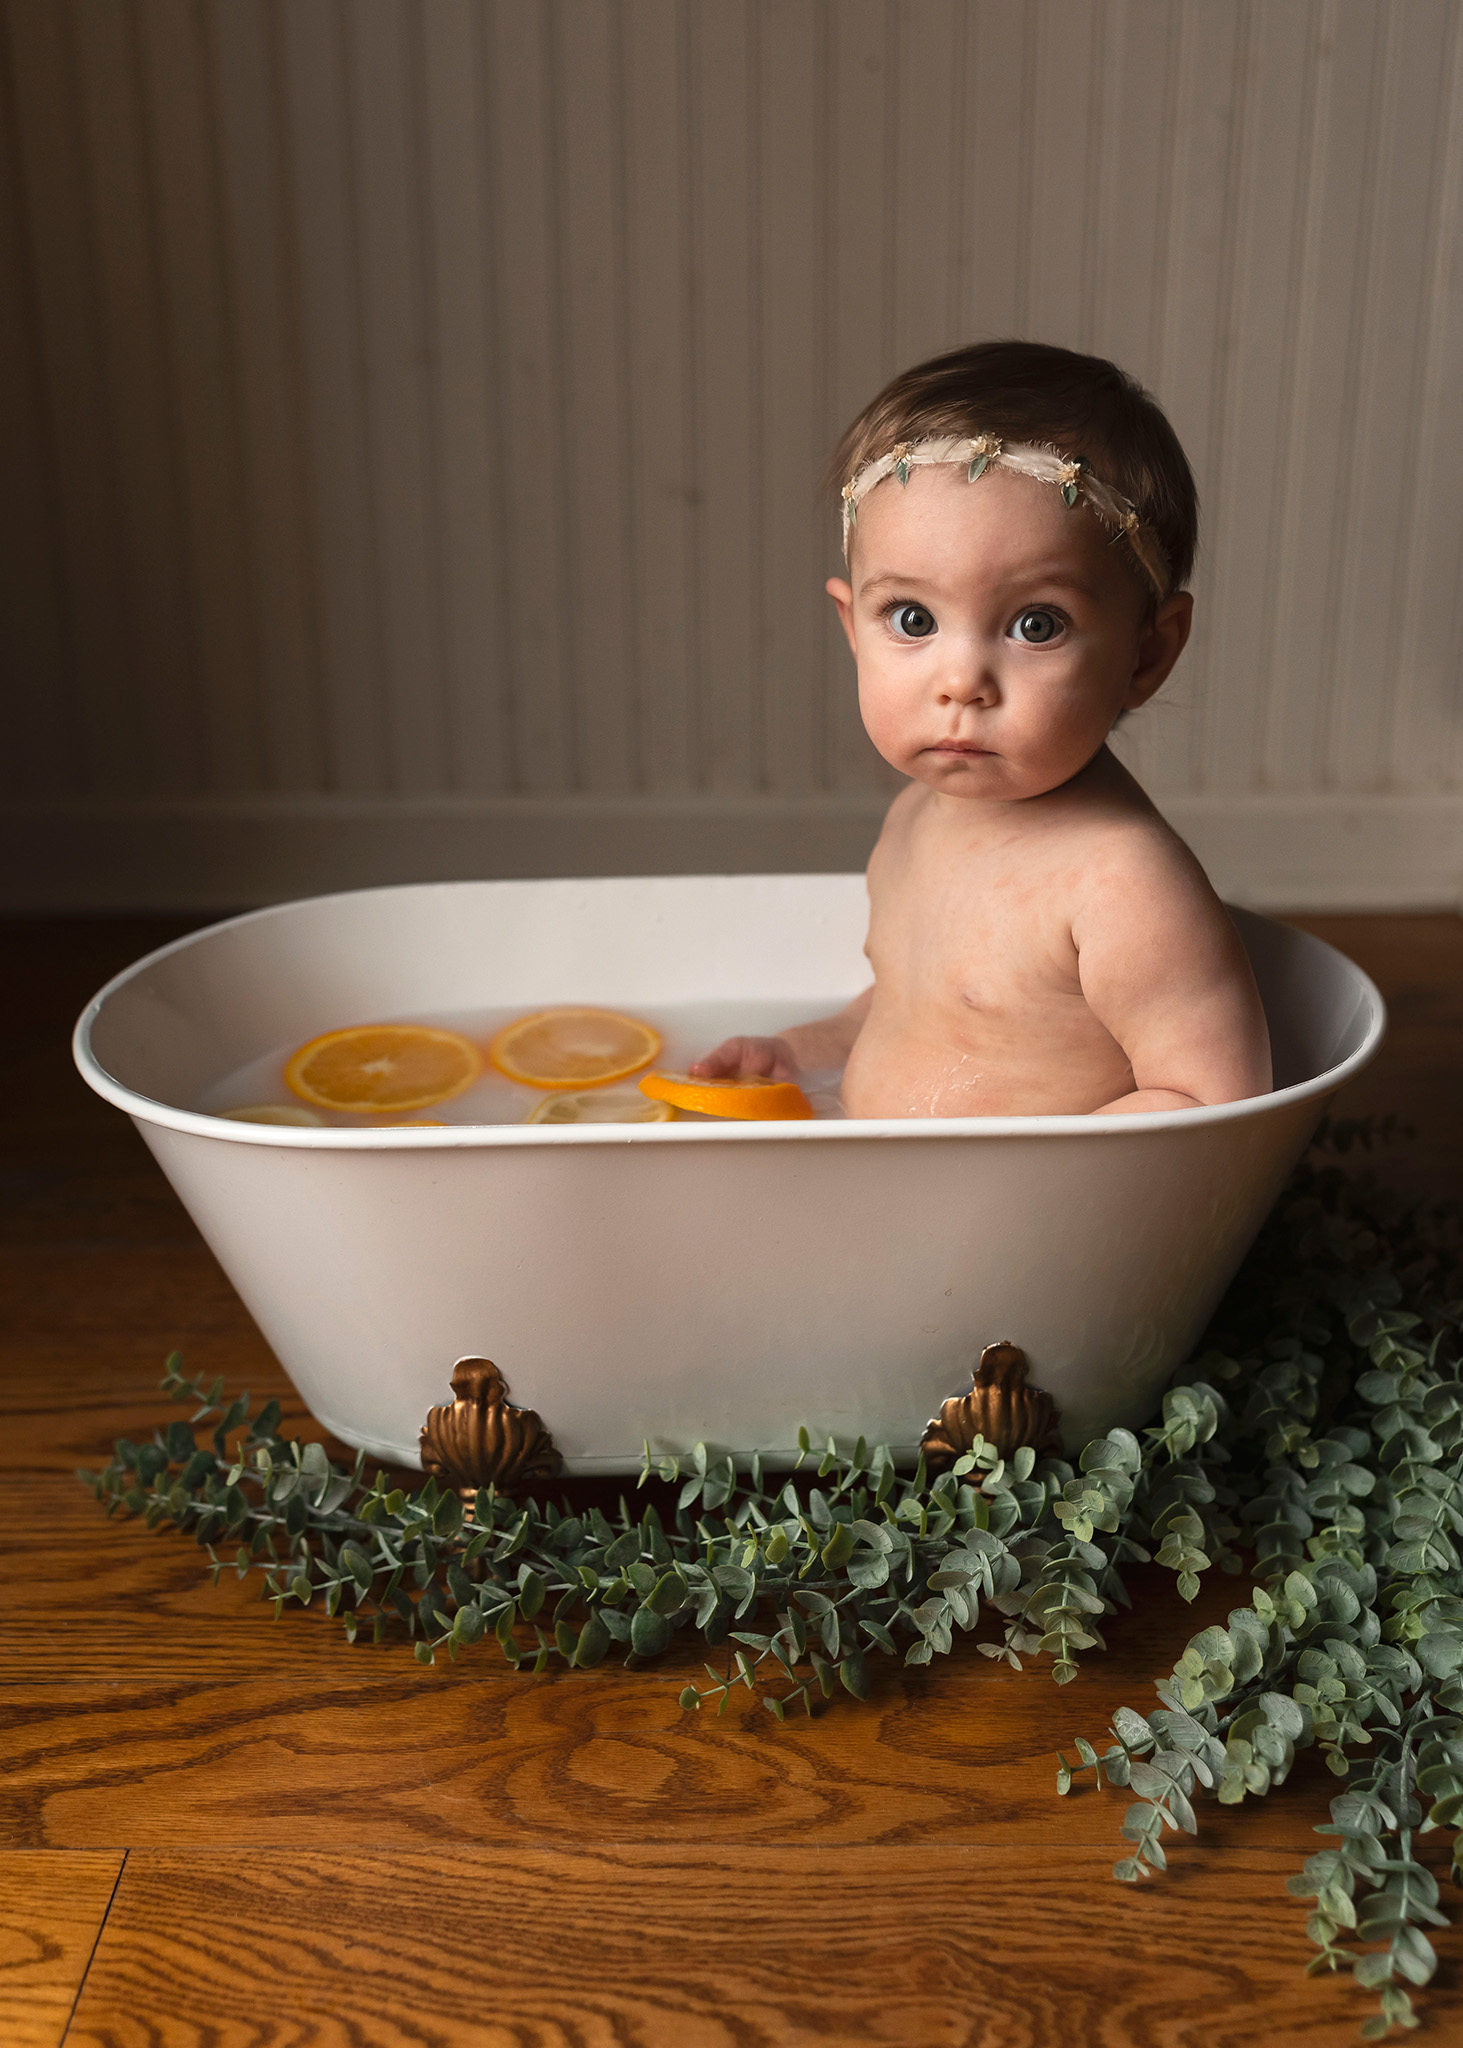 Baby holds orange as she sits in small clawfoot tub